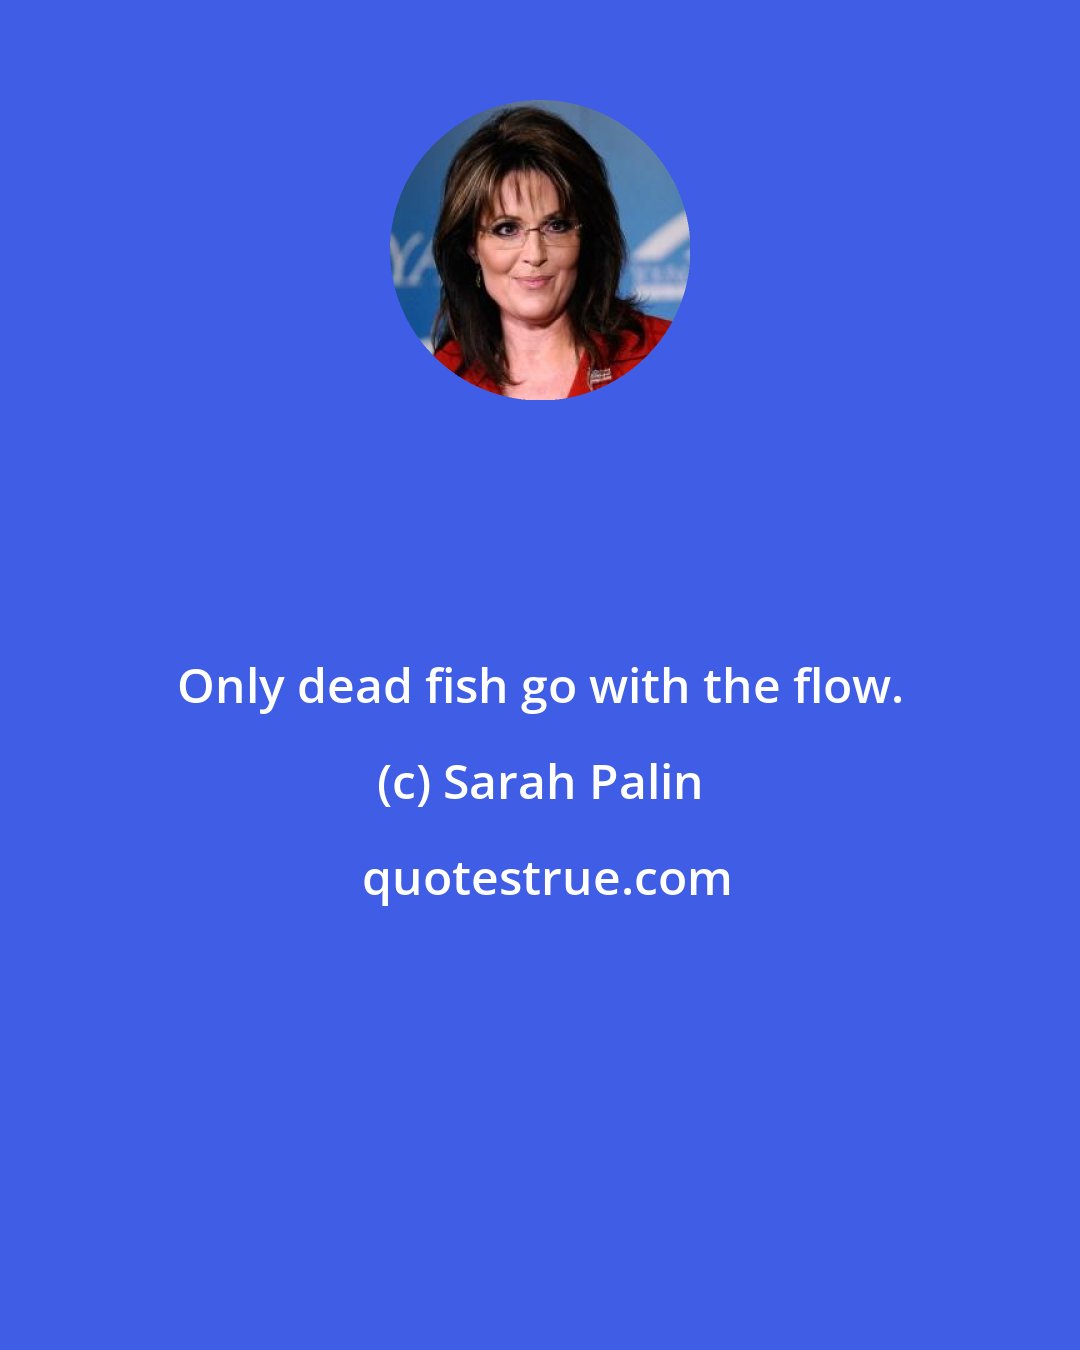 Sarah Palin: Only dead fish go with the flow.